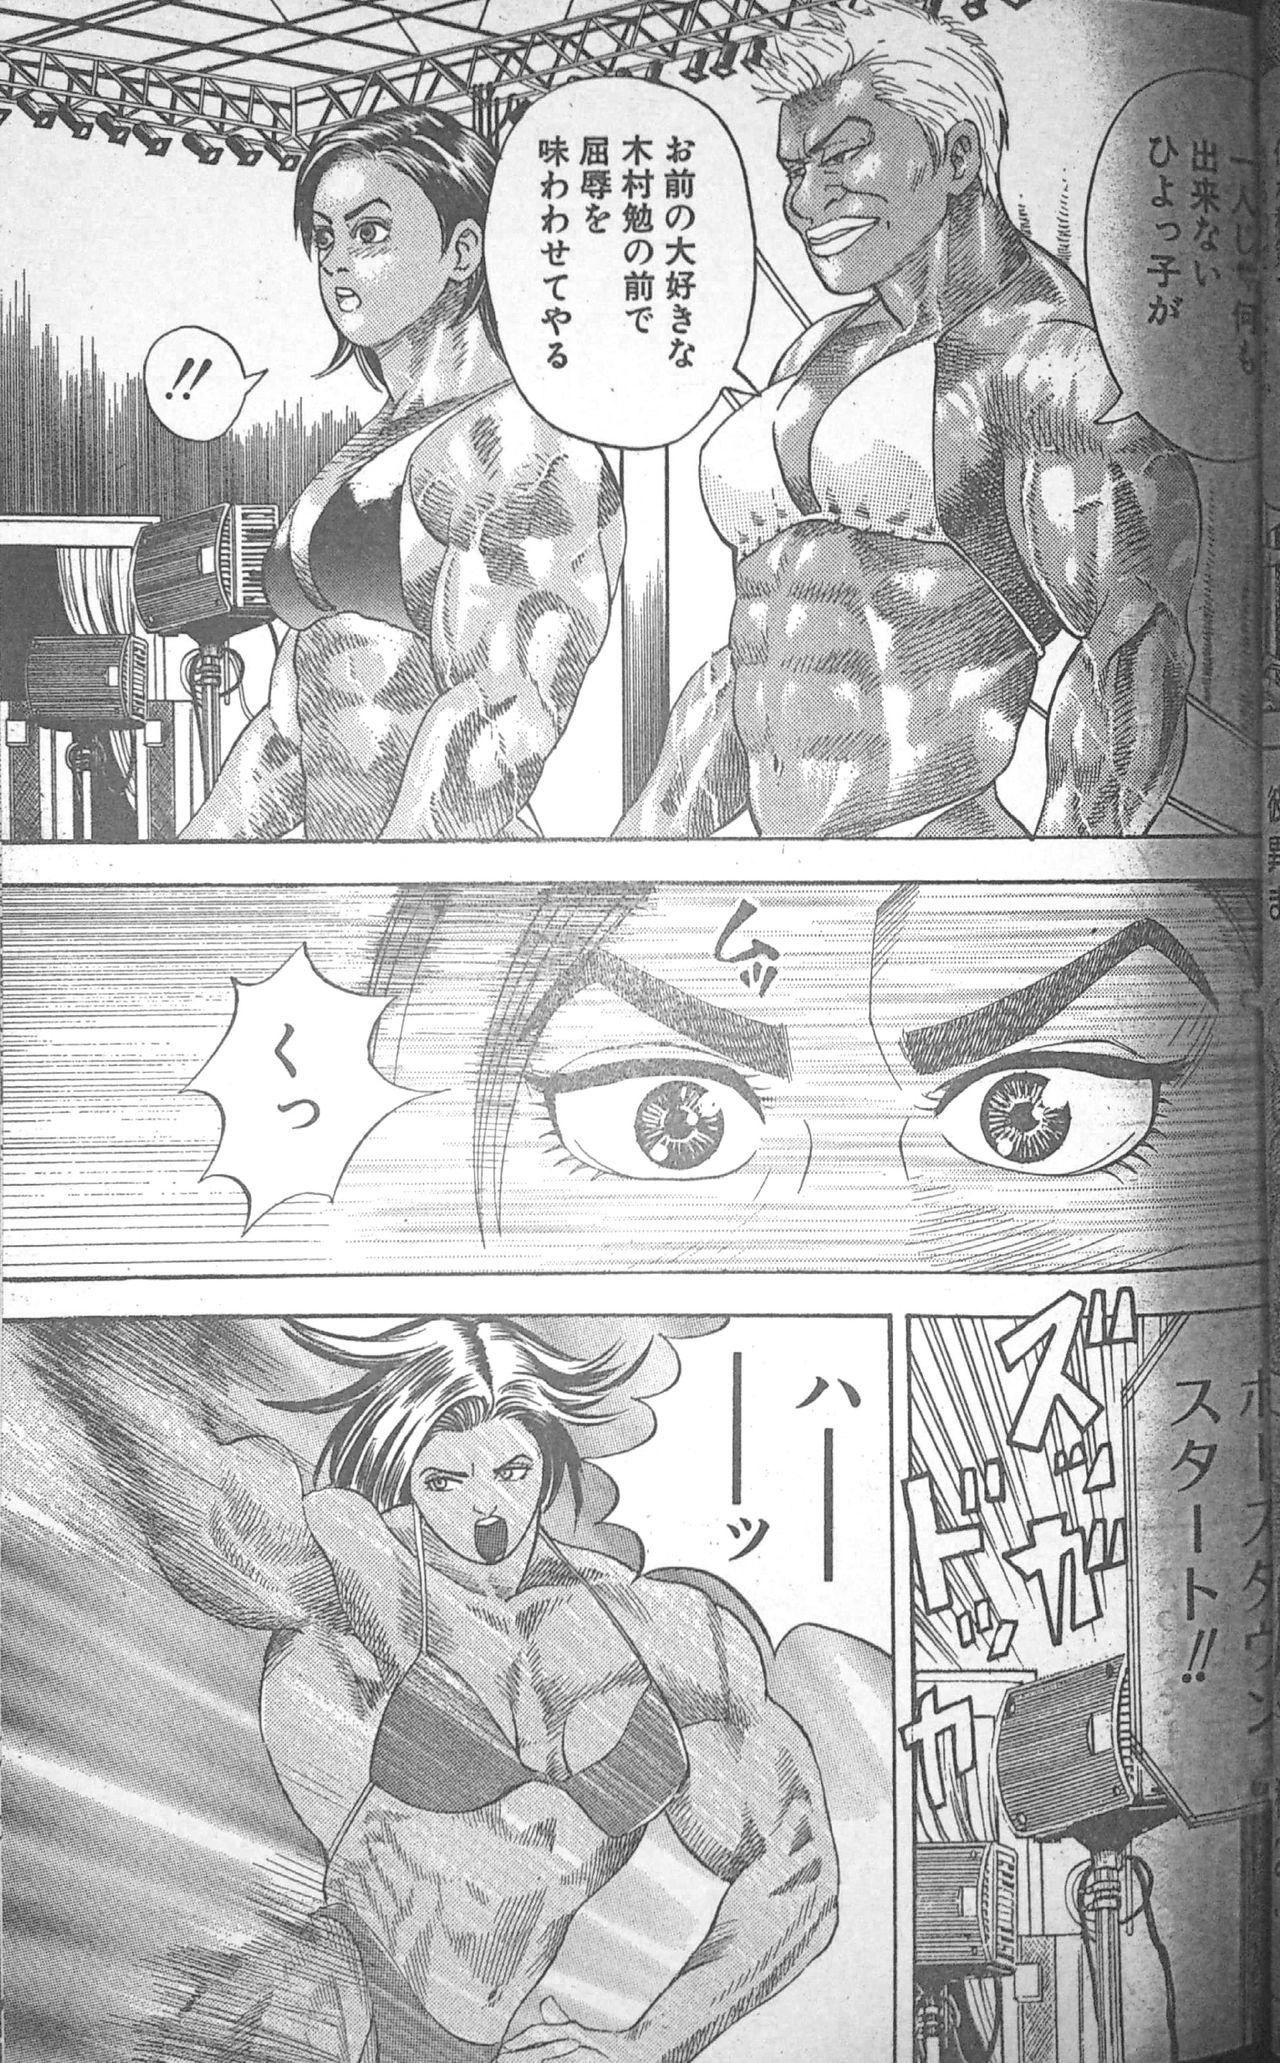 Muscle Strawberry Chapter 3 27